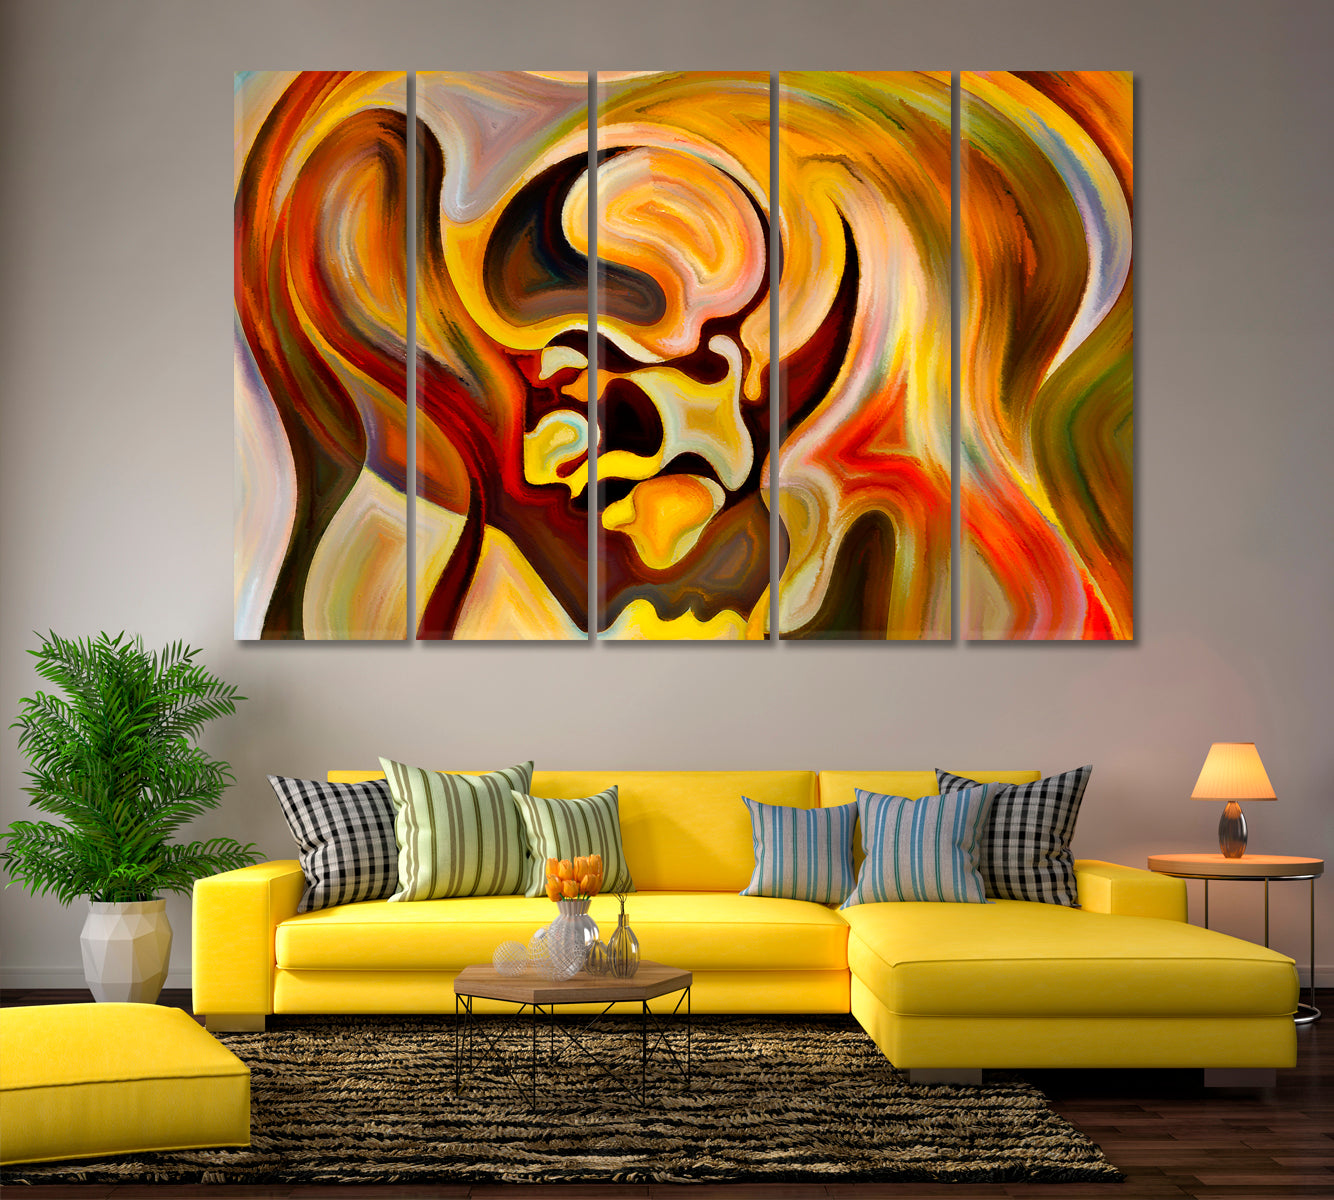 You And I Abstract Allegory Human And Shapes In Colors Abstract Art Print Artesty 5 panels 36" x 24" 